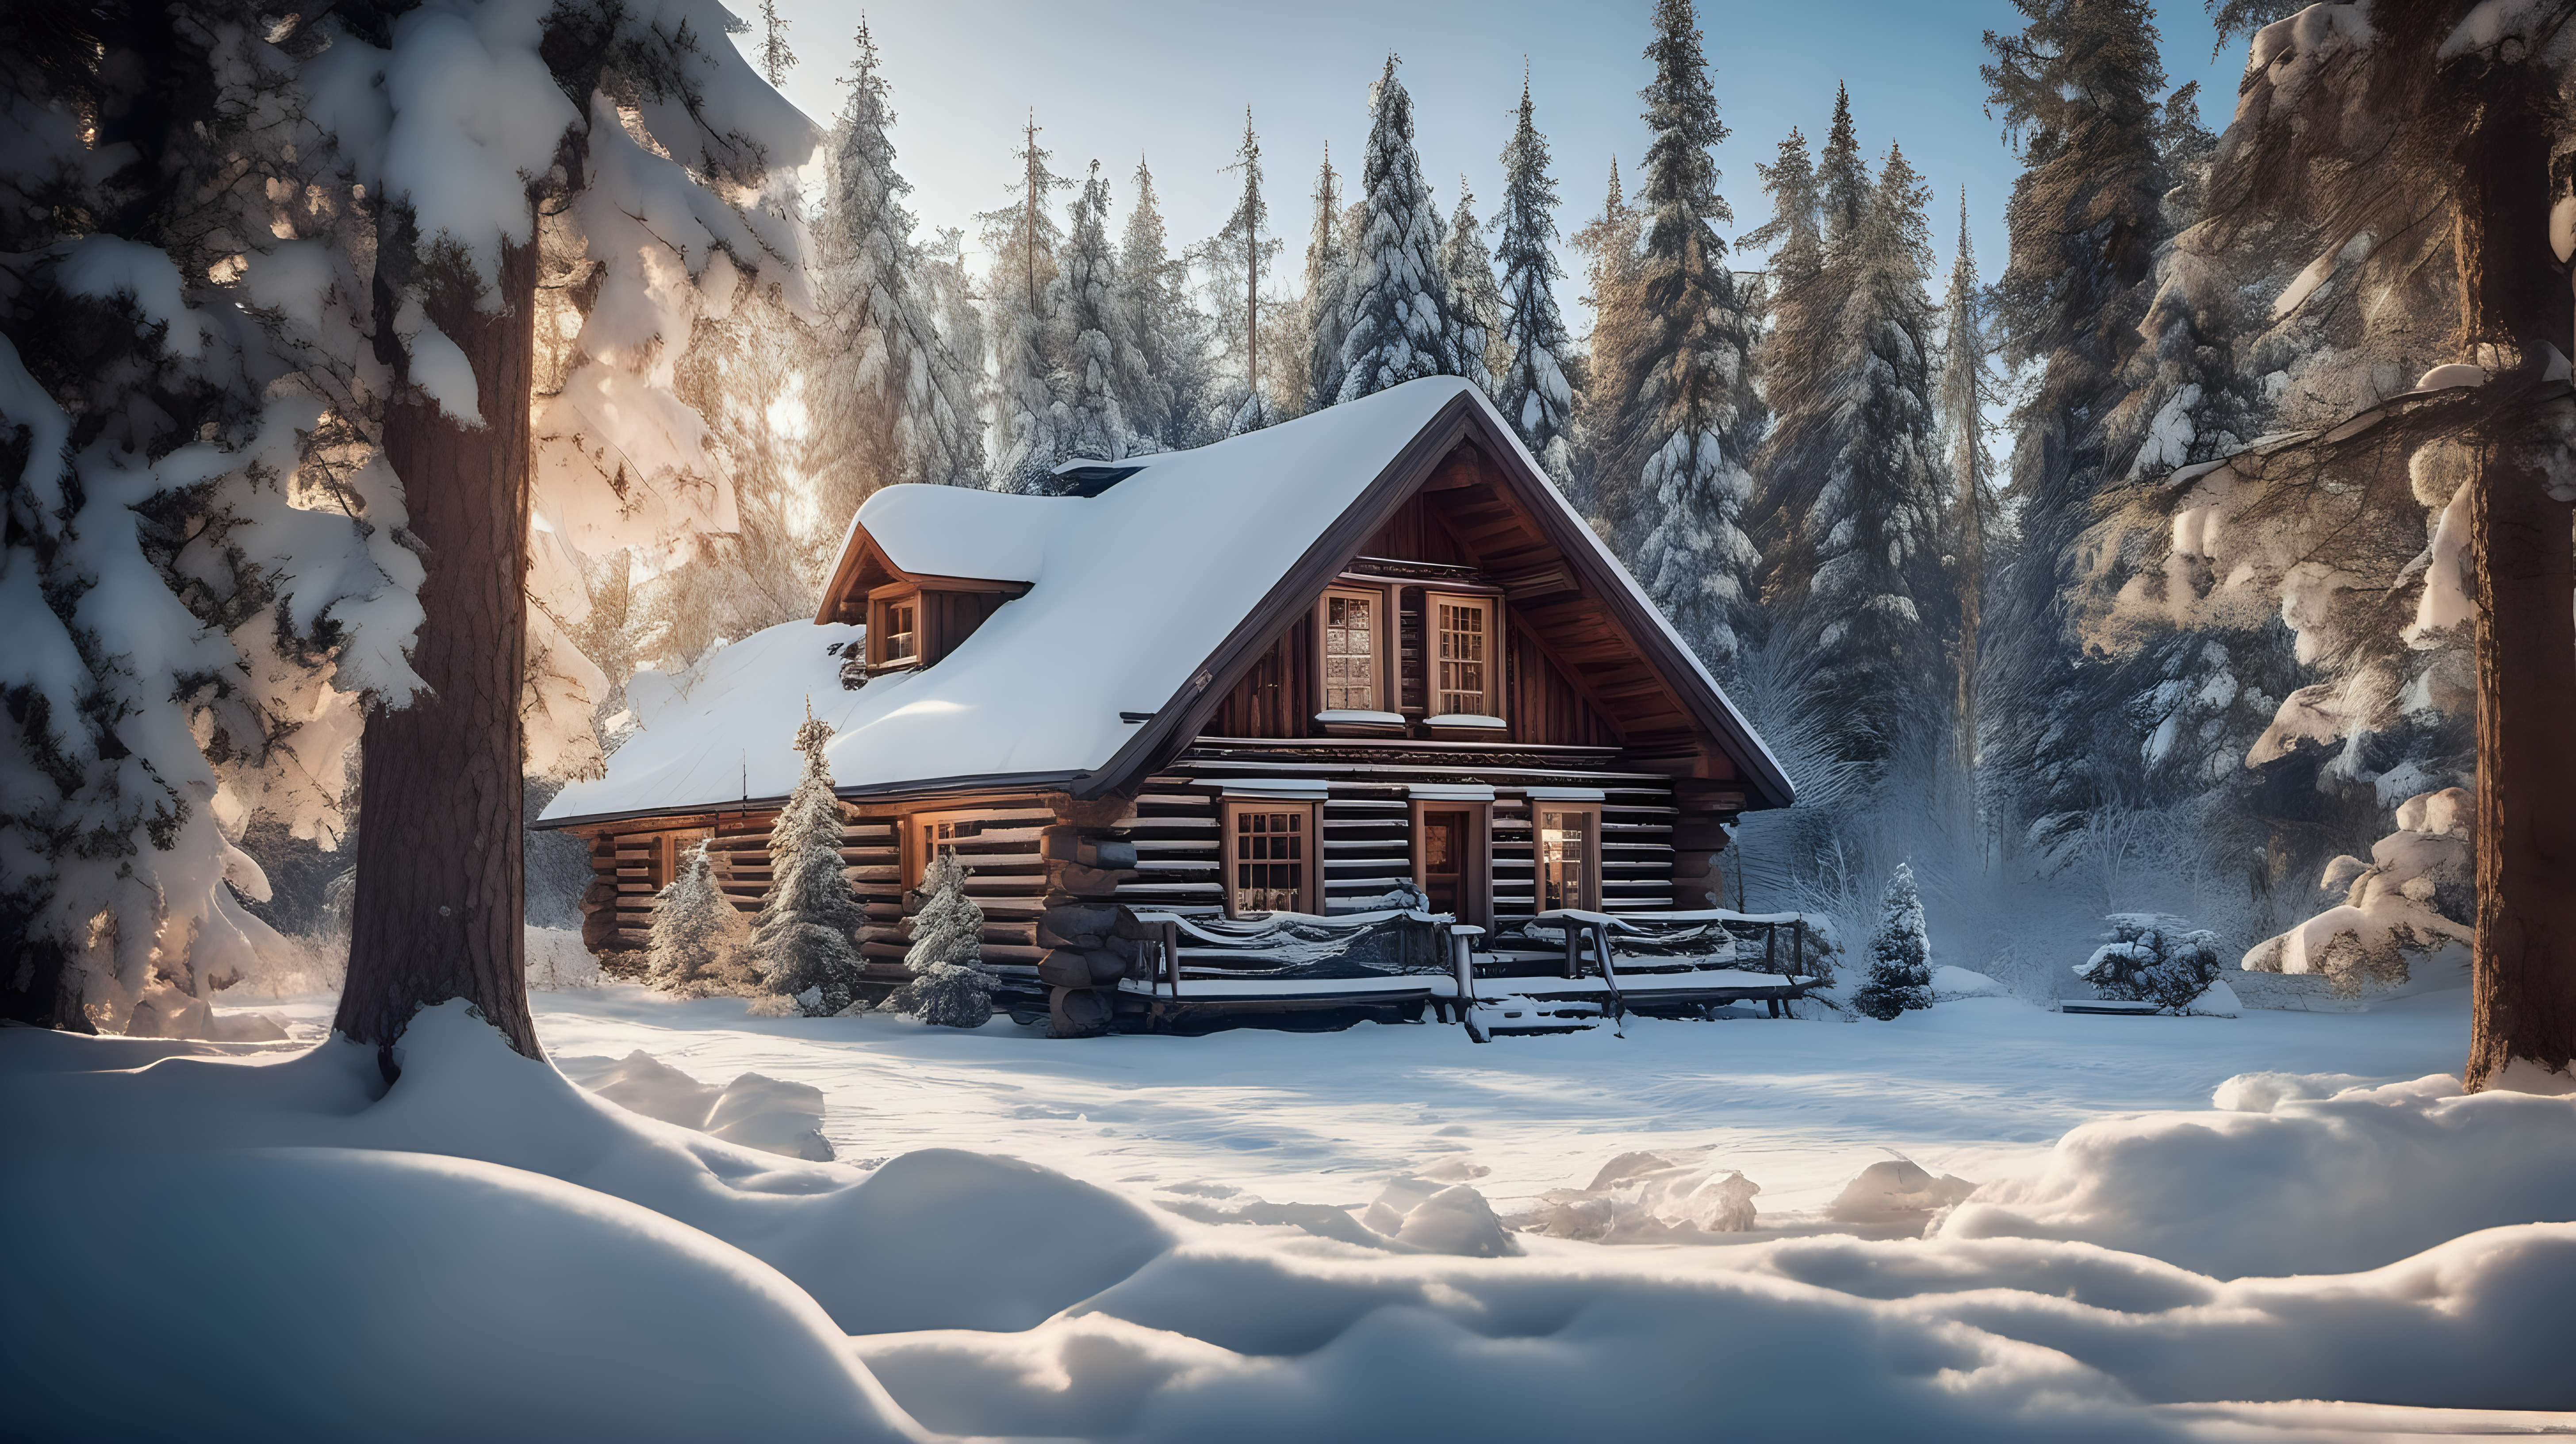 A cozy, snow-covered log cabin nestled amidst the tranquil beauty of a snowy Russian forest, however, the cabin is not actually there it's just open space. Two cars, partially covered in snow, are parked in front of the cabin, creating a serene winter scene. Cozy, Snowy, Rustic, Tranquil, Winter Wonderland. DSLR camera. Wide-angle or standard lens for capturing the cabin and the surrounding snowy landscape. late afternoon. Focus on the charming cabin enveloped in snow, portraying a sense of warmth and coziness against the wintry backdrop. Frame the shot to include the cabin, the surrounding snow-laden trees, and the parked cars, highlighting the rustic charm and tranquility of the scene. Aim for high-resolution digital images to capture the intricate details of the snow-covered cabin and the forest surroundings. Post-processing can enhance the wintry atmosphere by adjusting exposure and contrast, showcasing the inviting coziness of the cabin amidst the snowy Russian forest.



